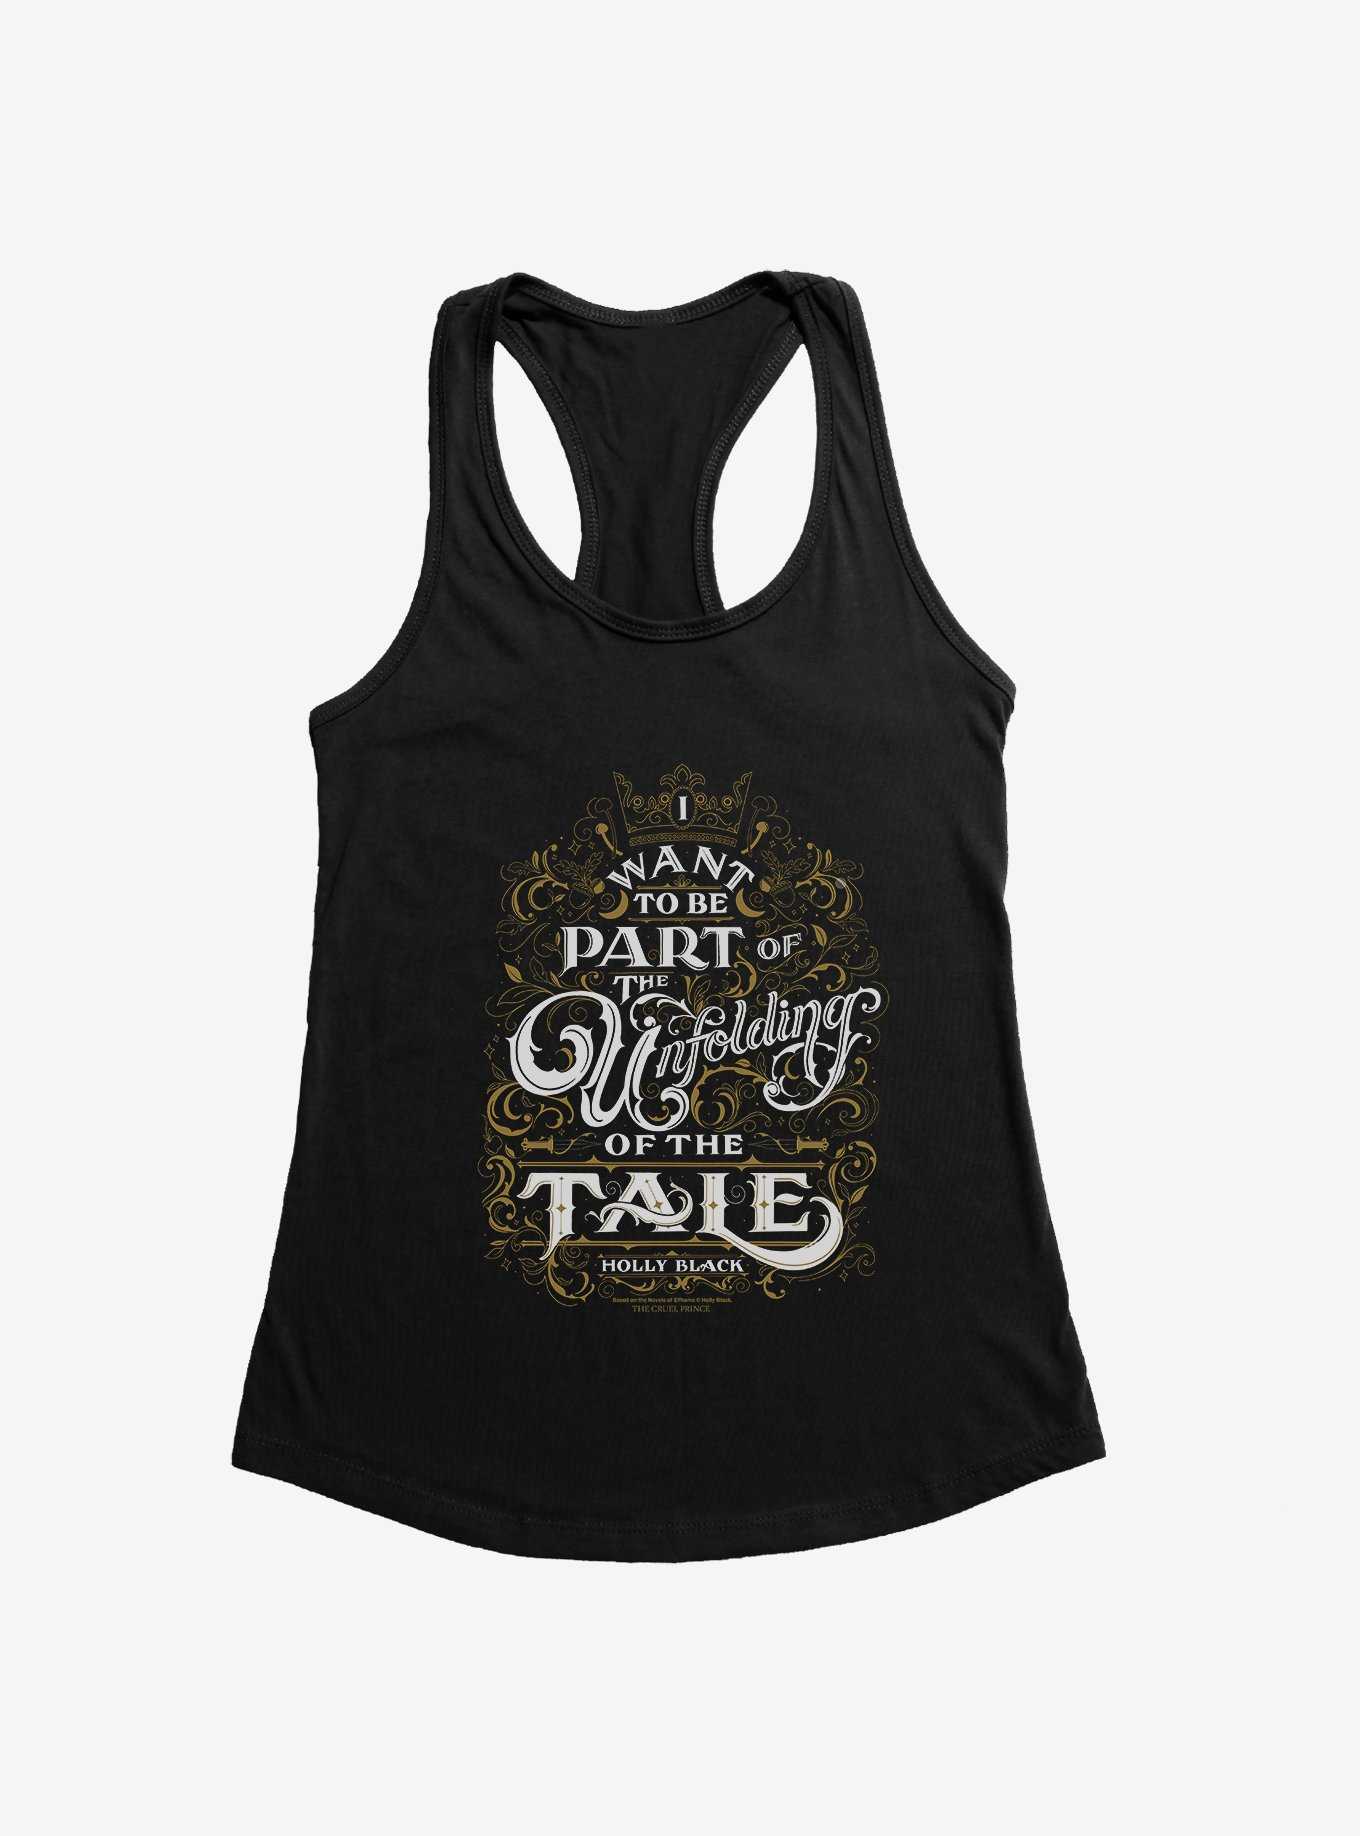 The Cruel Prince Sinister Enchantment Collection: Unfolding Of The Tale Girls Tank , , hi-res